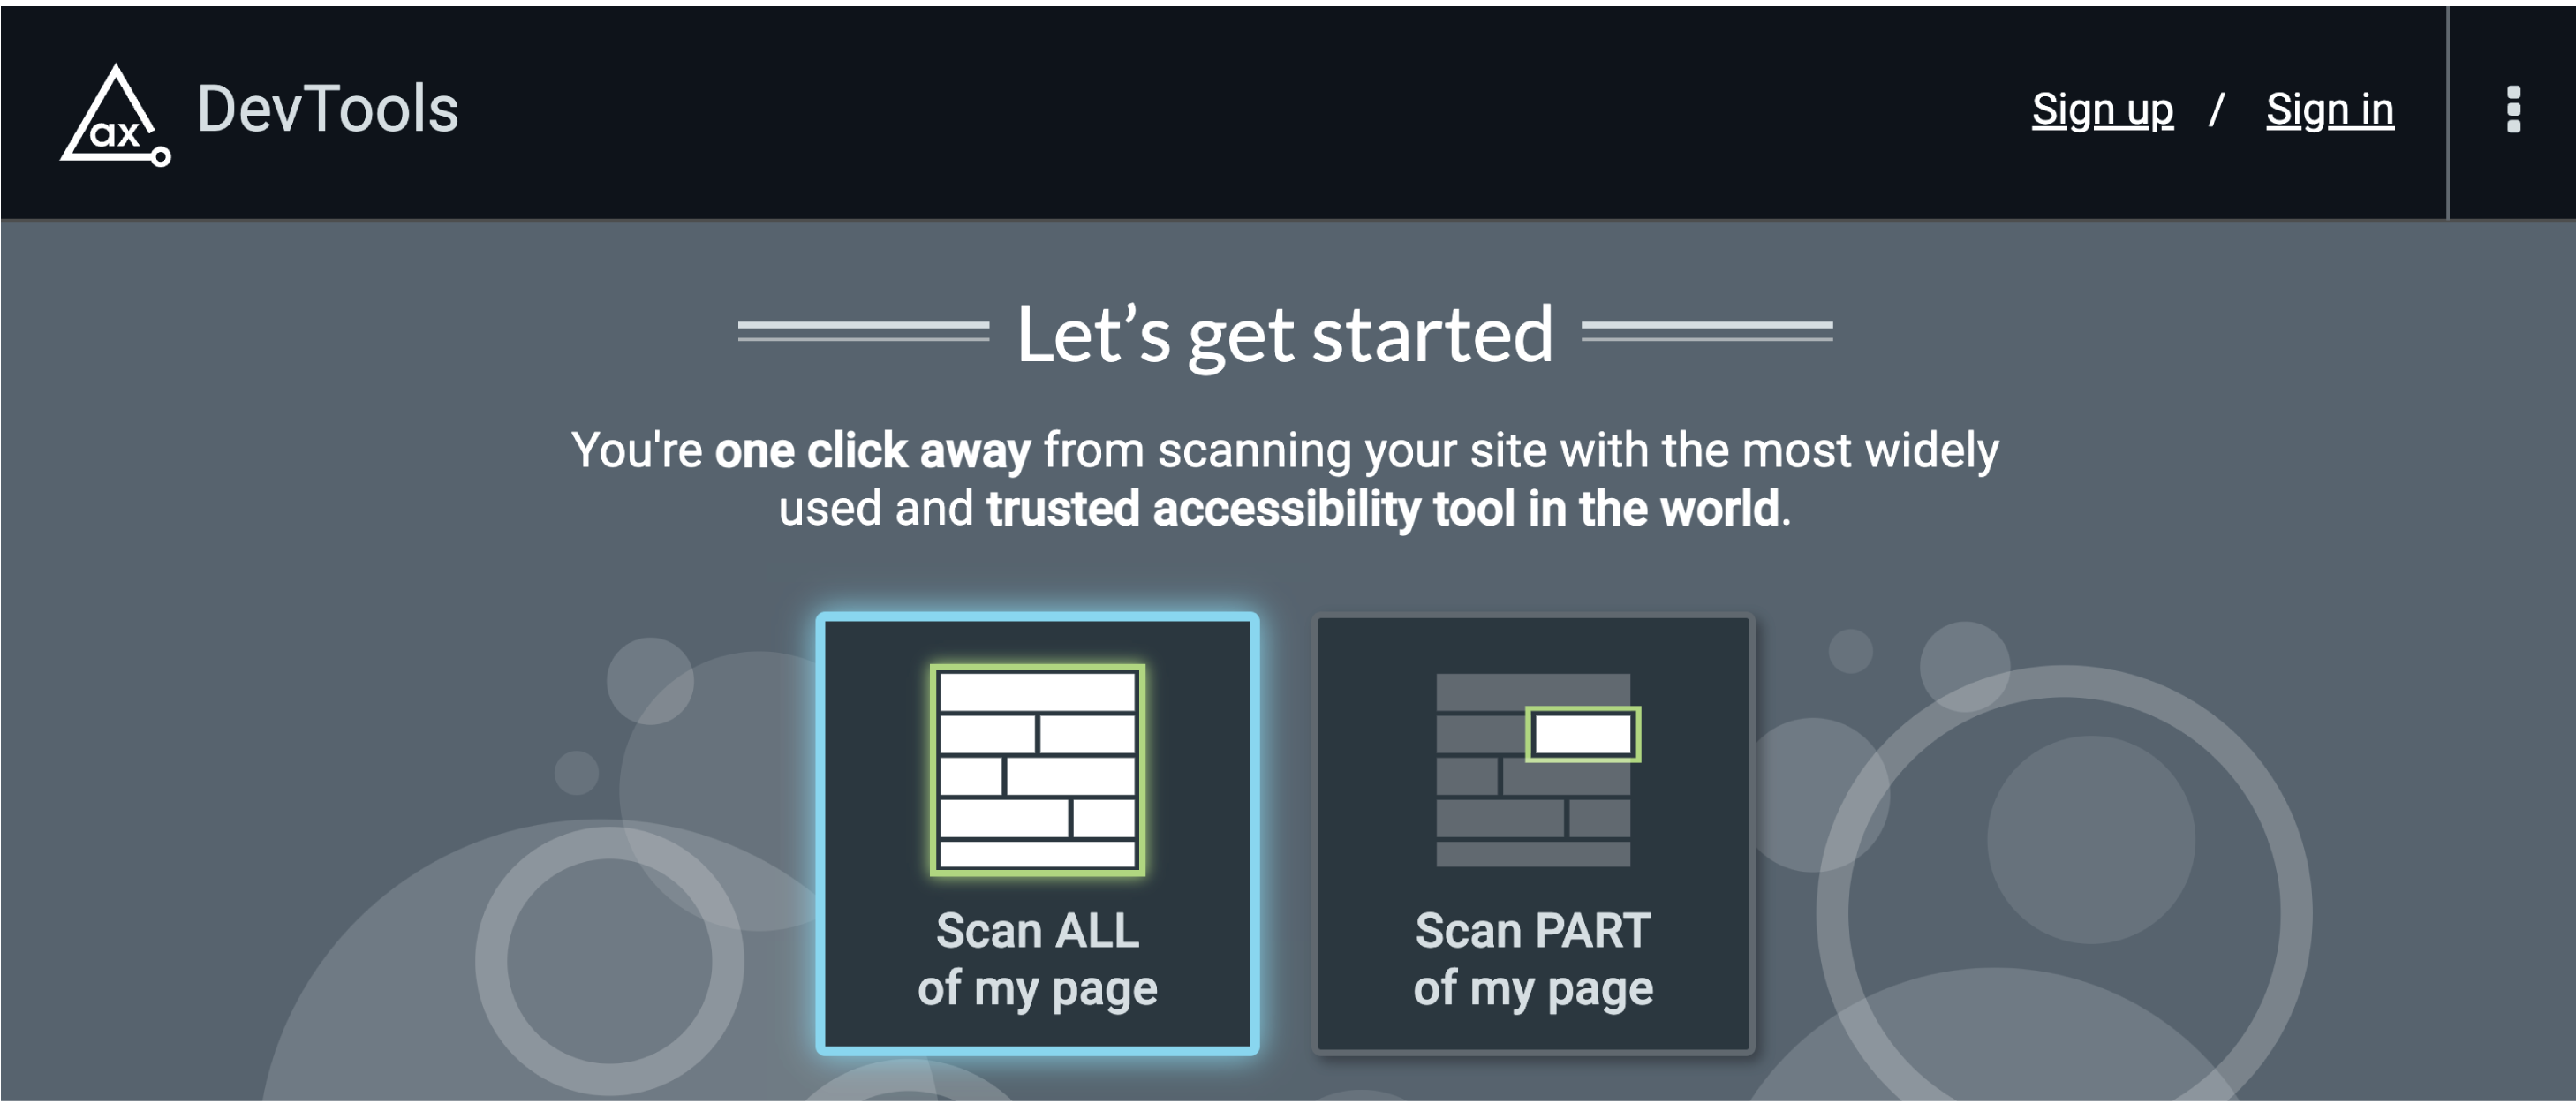 Free axe DevTools browser extension launch screen with "Scan ALL of my page" button highlighted.